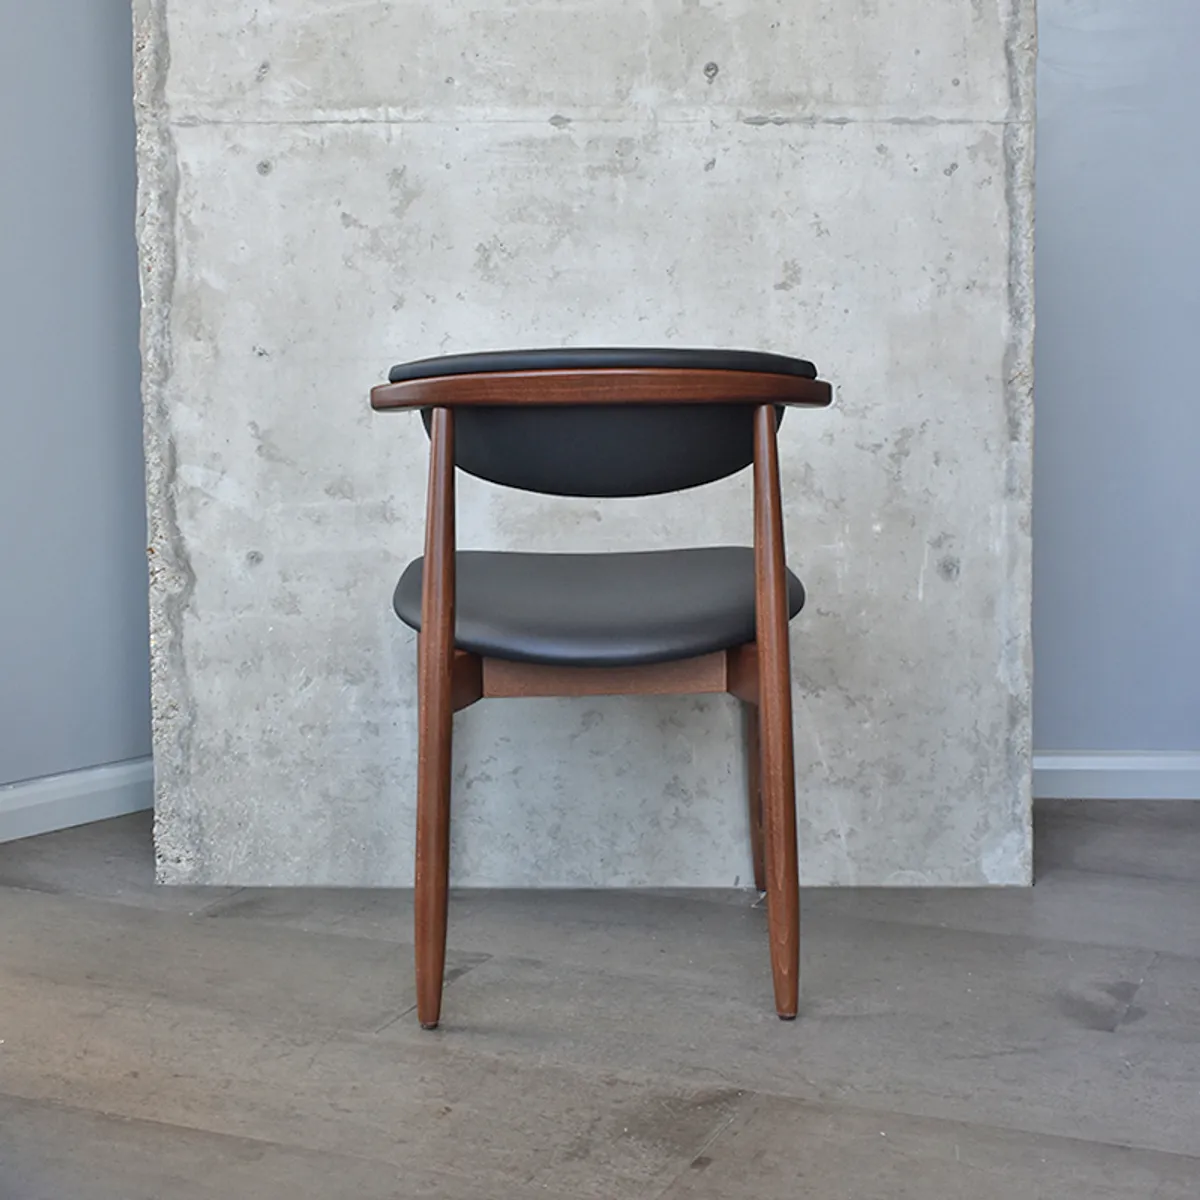 Jona Chair New Furniture From Milan 2019 By Inside Out Contracts 010